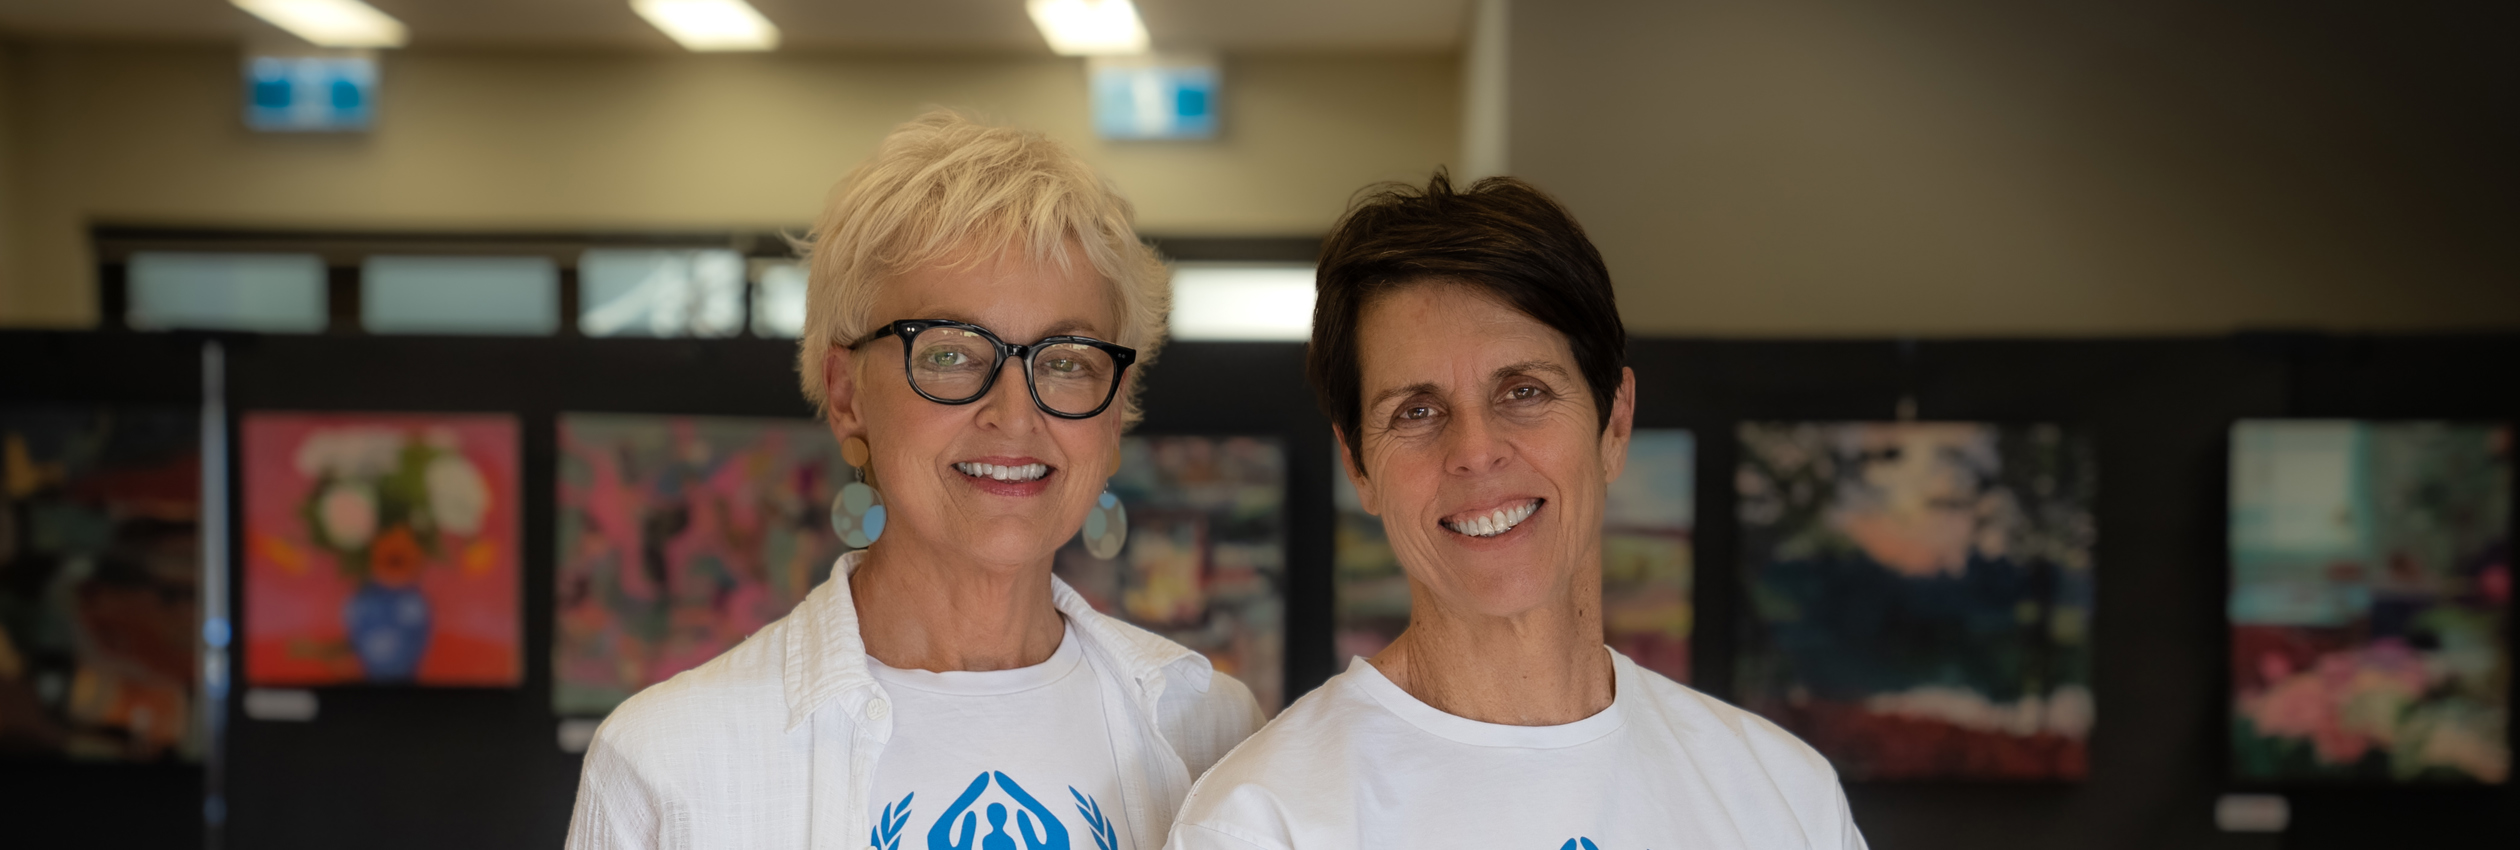 Fundraisers, Mary Lou and Therese wear UNHCR shirts